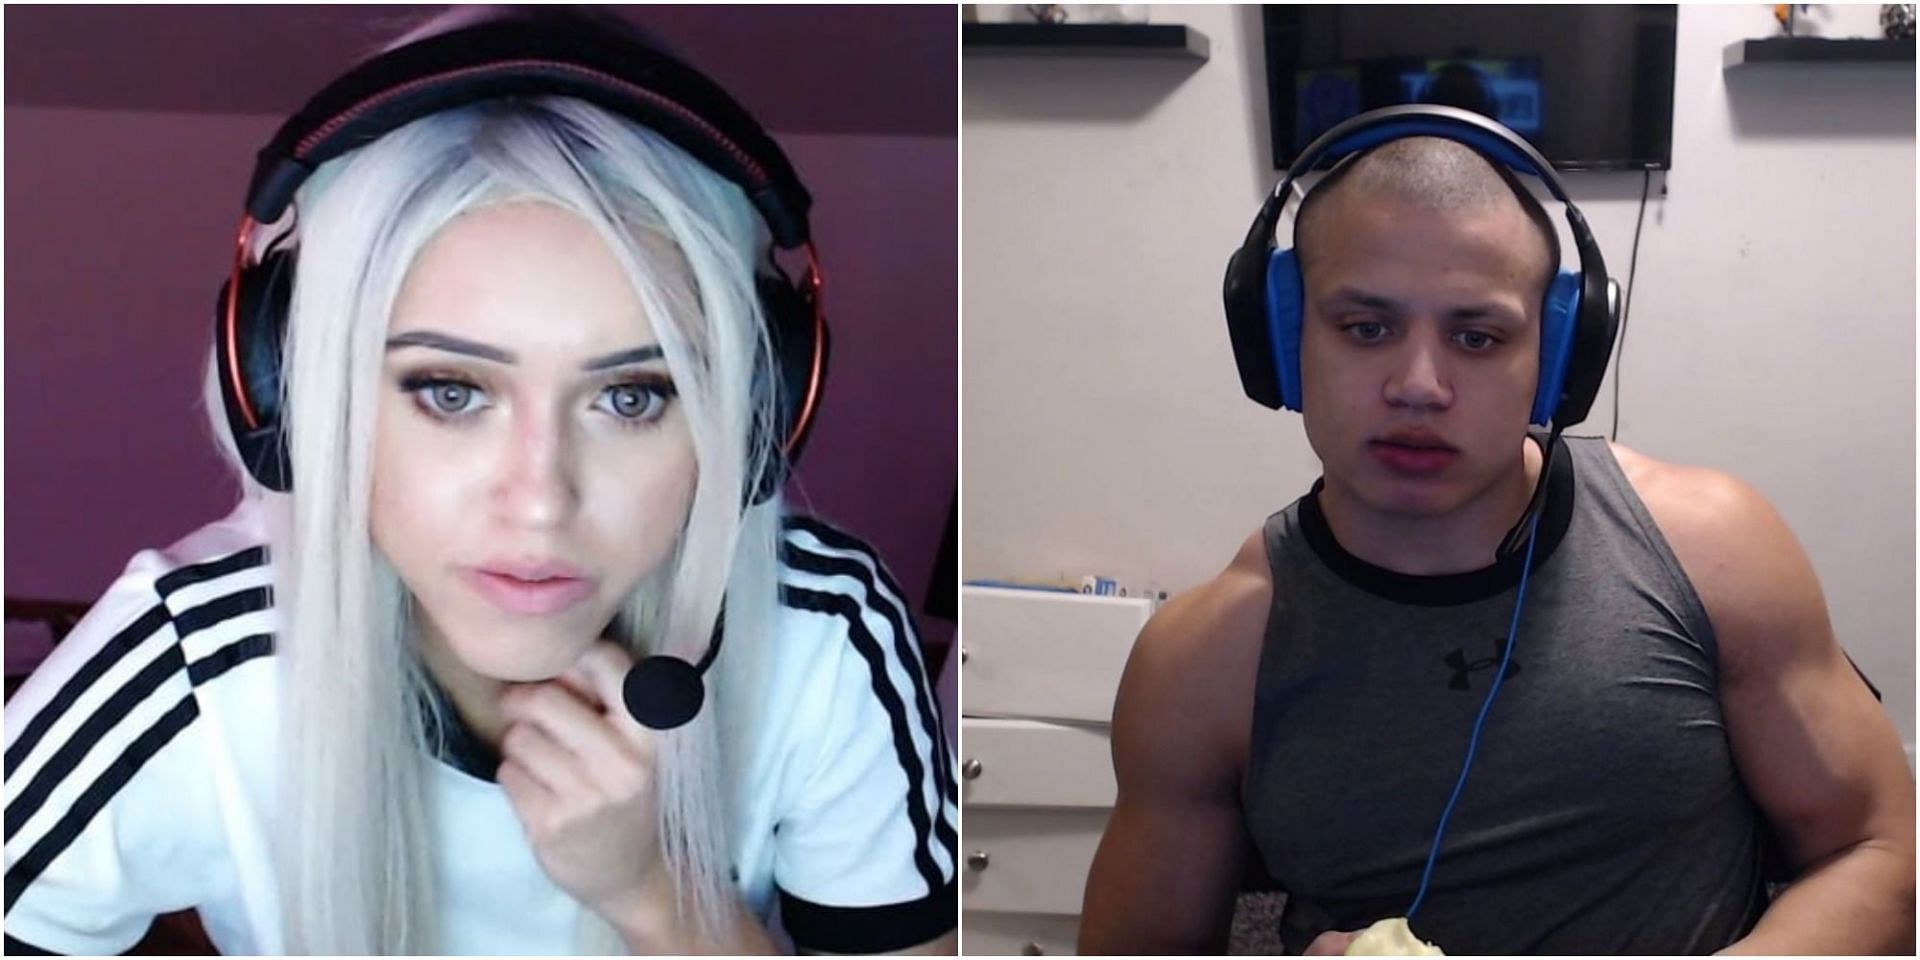 Tyler1 was involved in a hilarious incident while playing It Takes Two with his girlfriend (Image via Tyler1/Twitch and Macaiyla/Twitch)